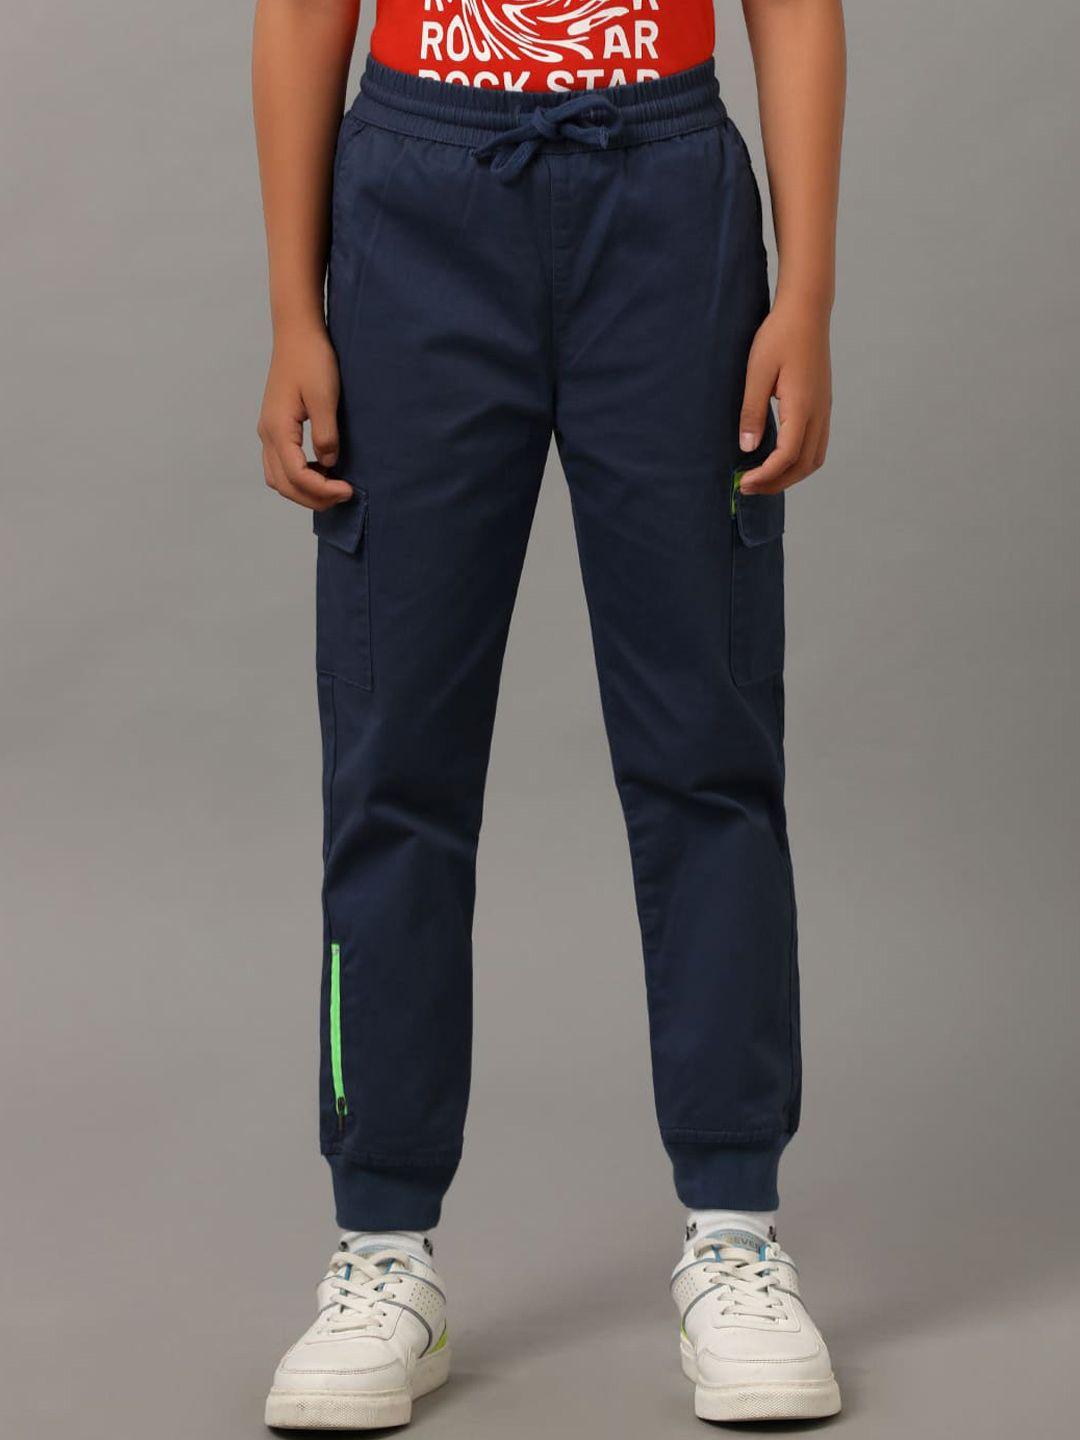 under fourteen only boys cotton joggers trousers